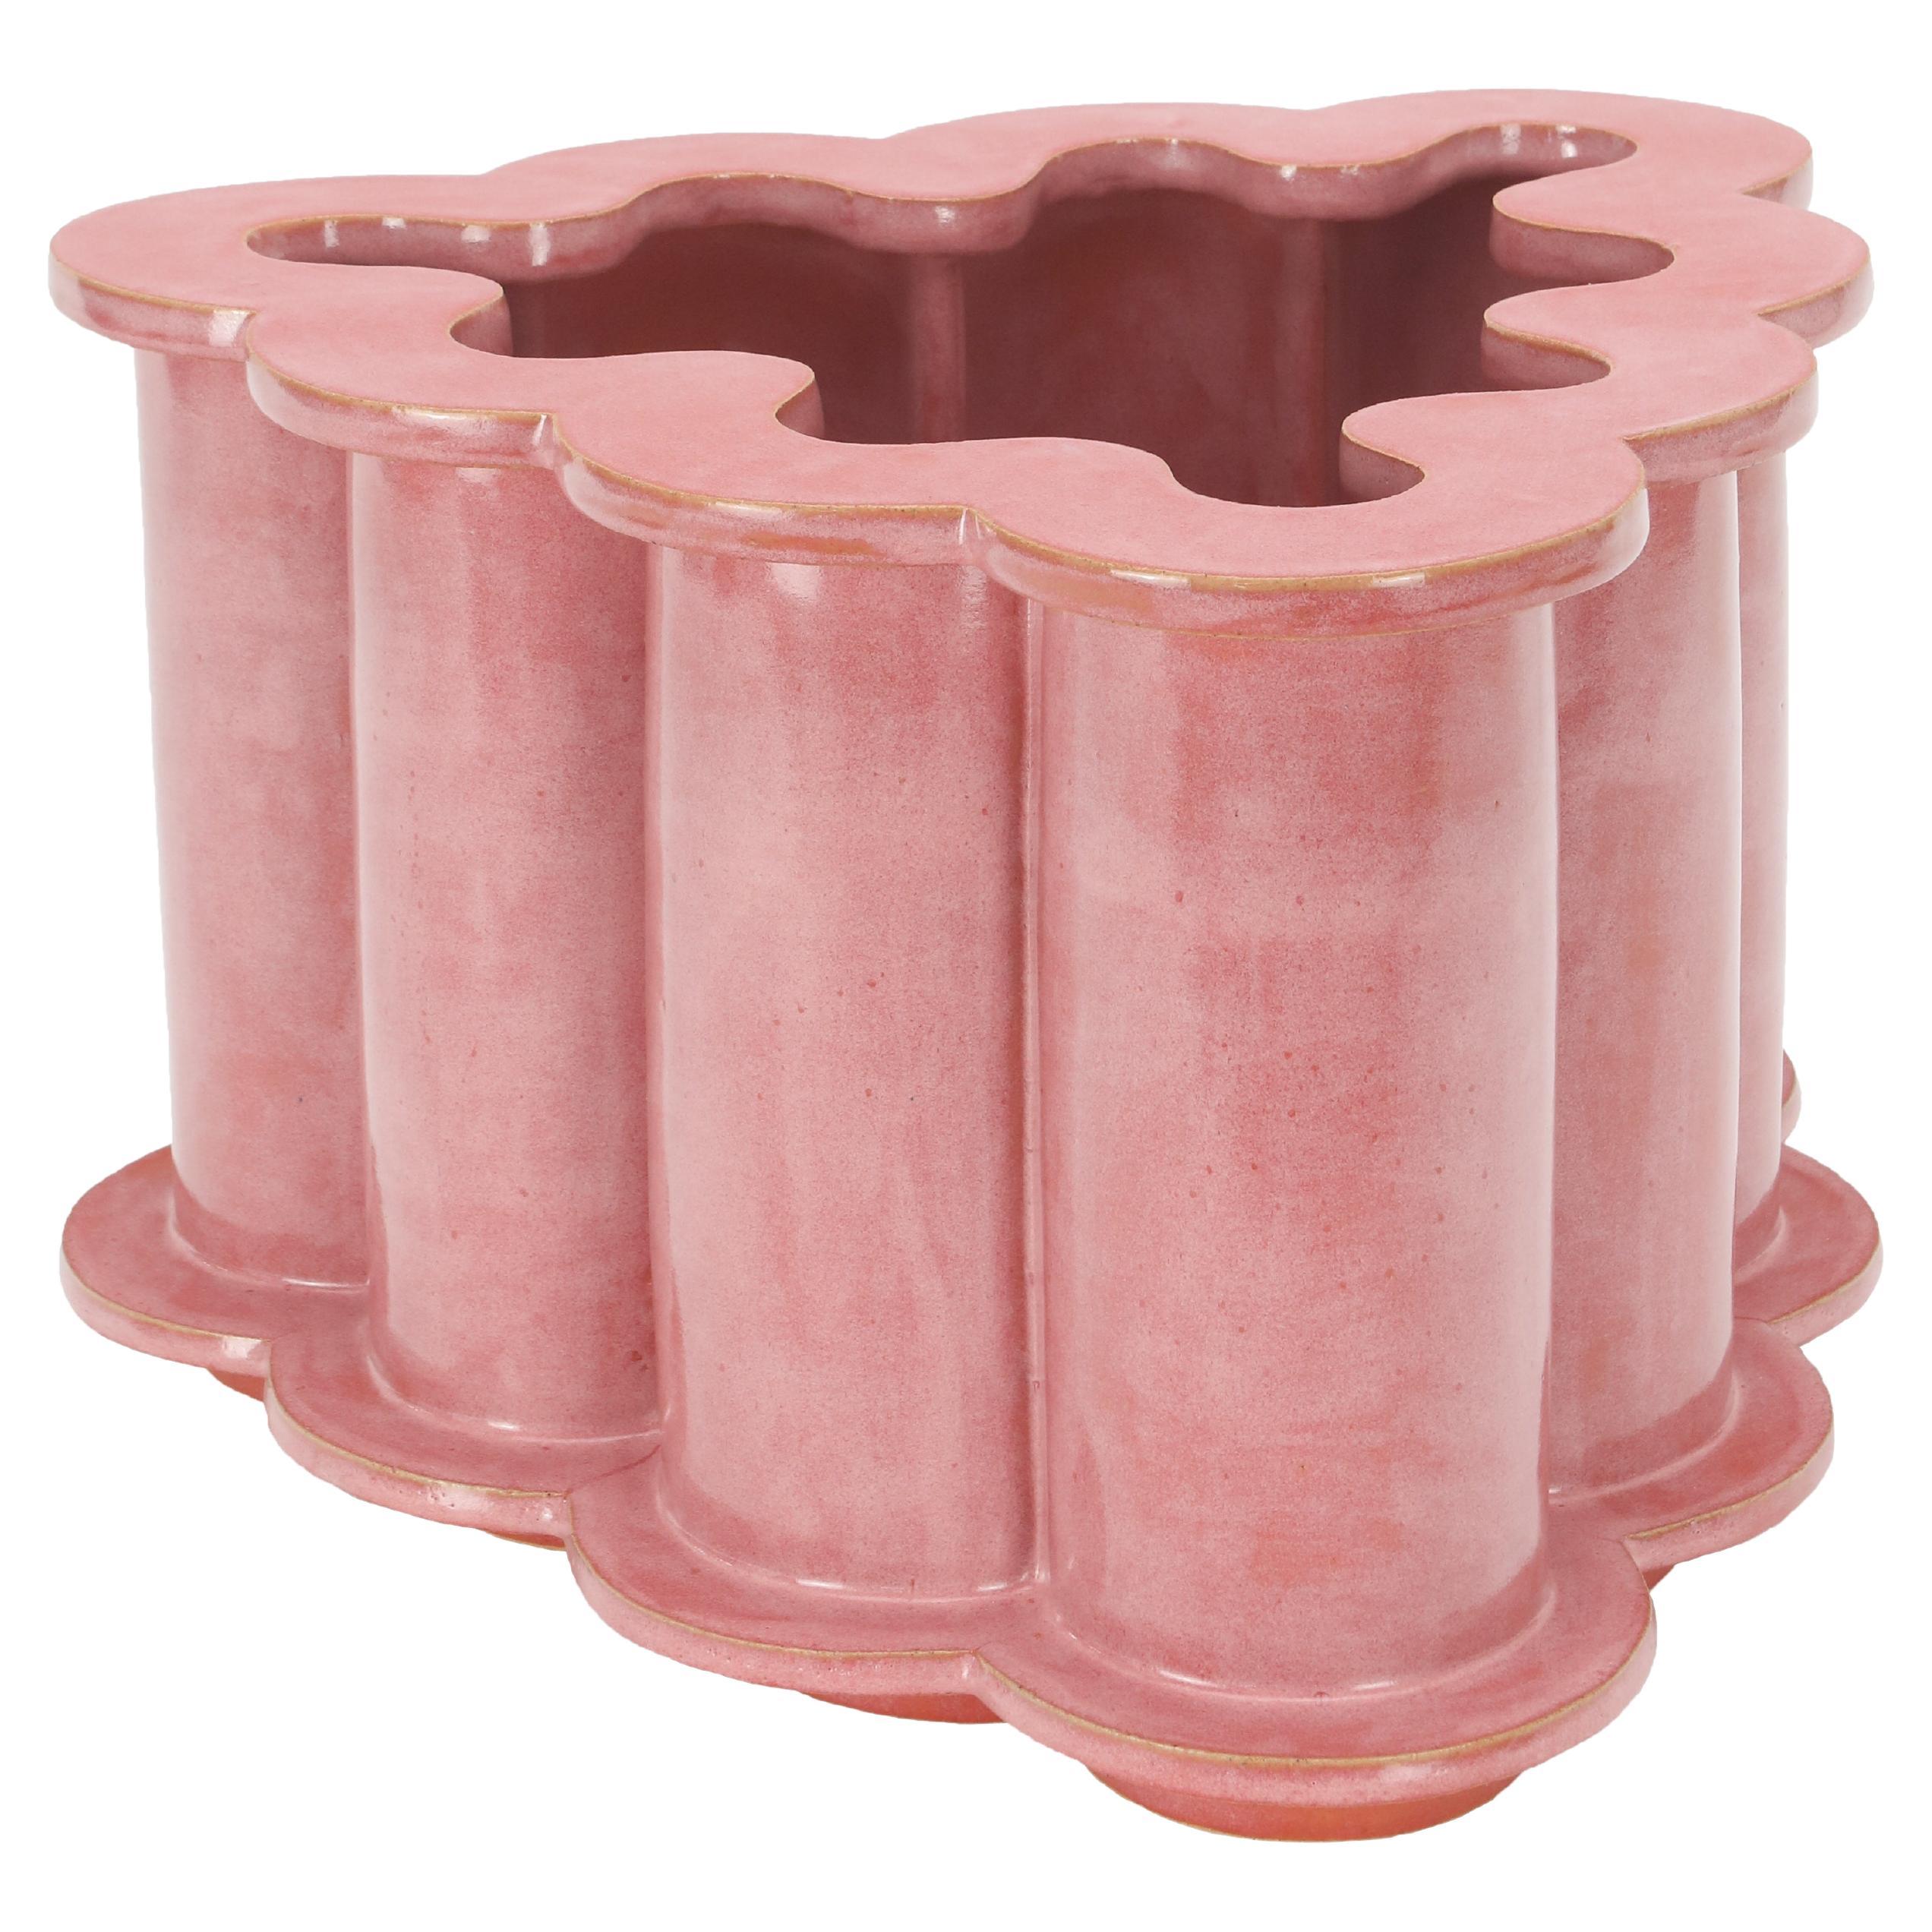 Short Ruffle Ceramic Planter in Sunset Pink by Bzippy For Sale